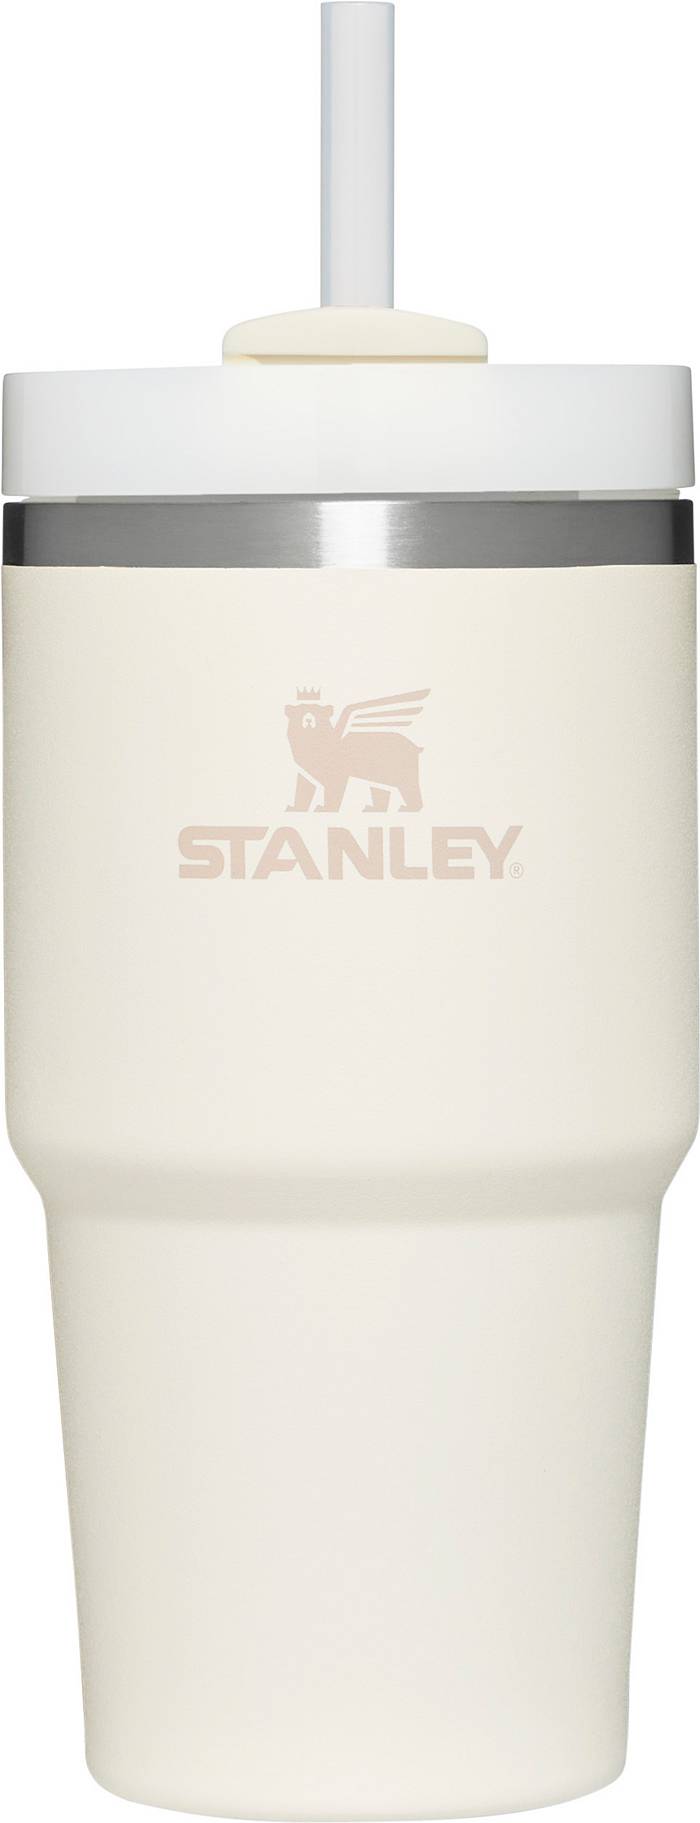 Stanley's Quencher H2.0 Flowstate Tumbler is an Adventure Quencher upgrade